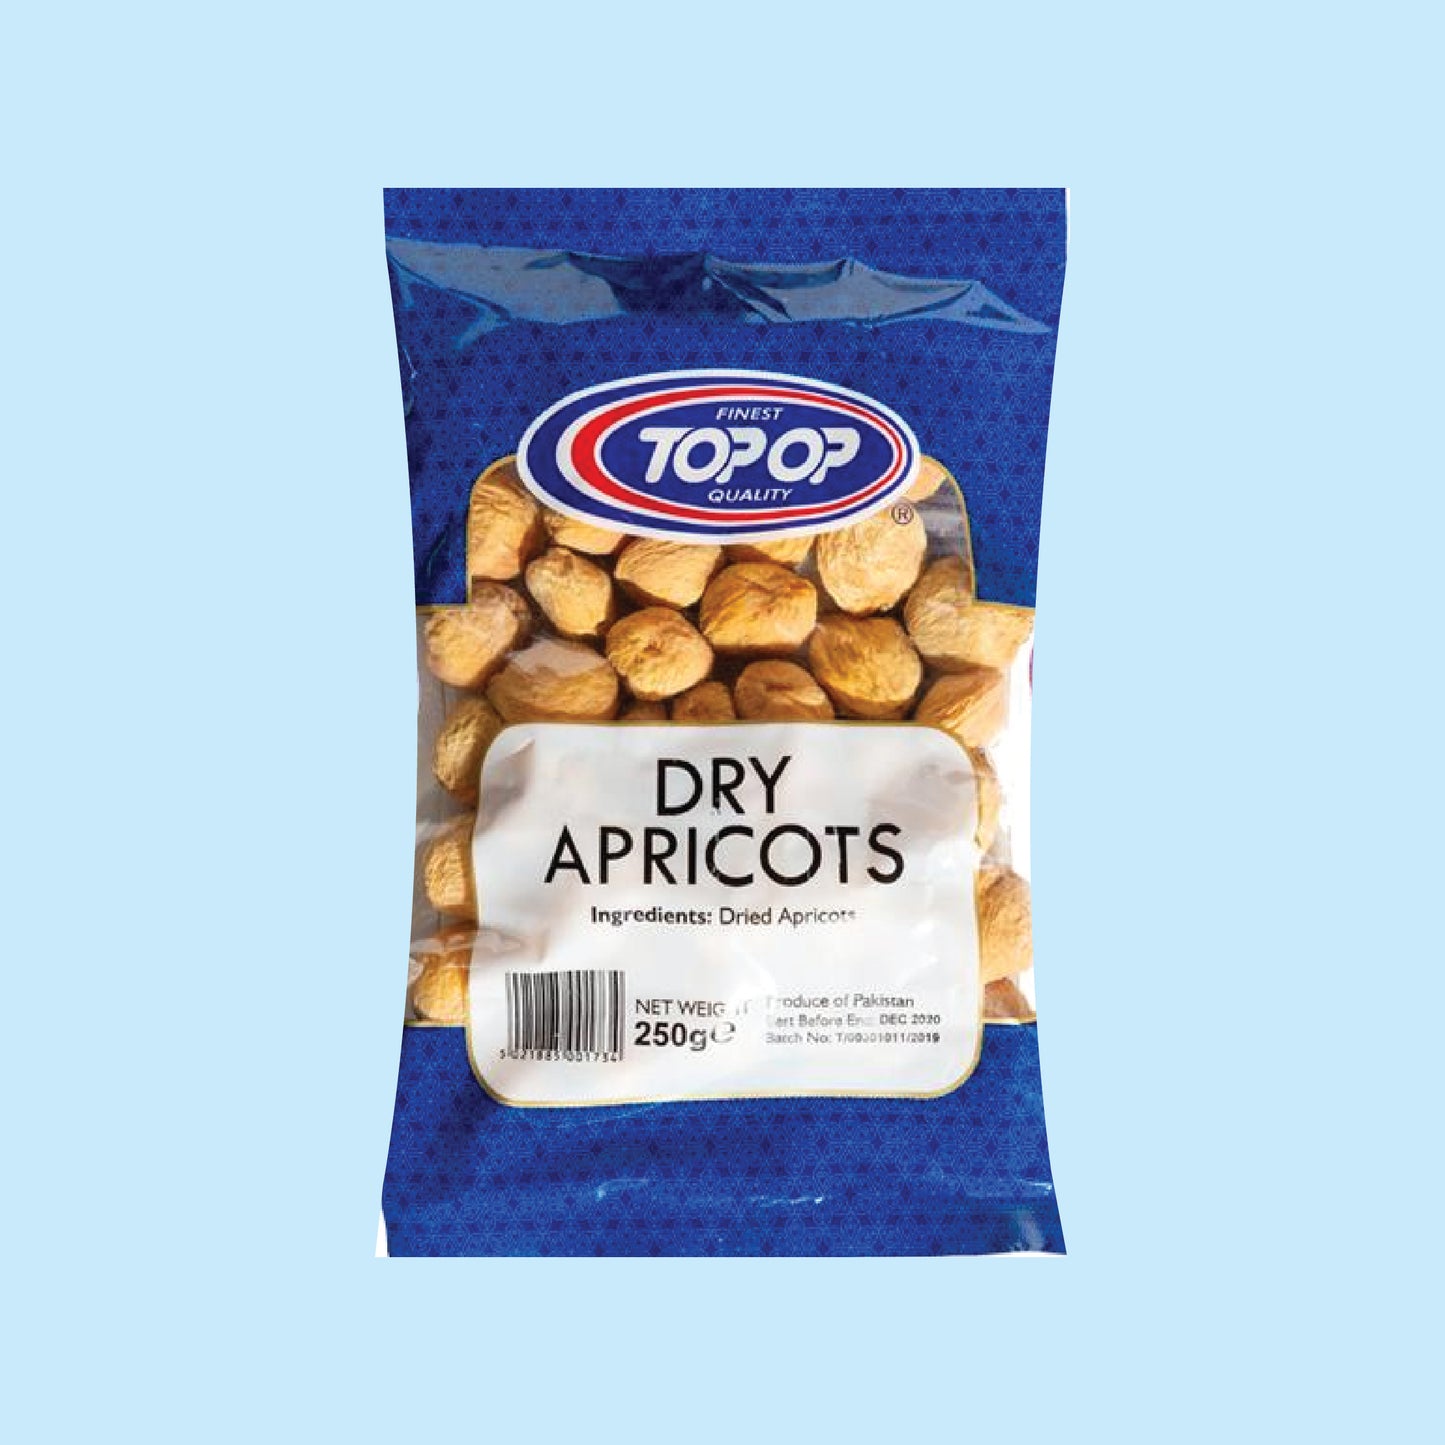 Top-Op Dry Apricots